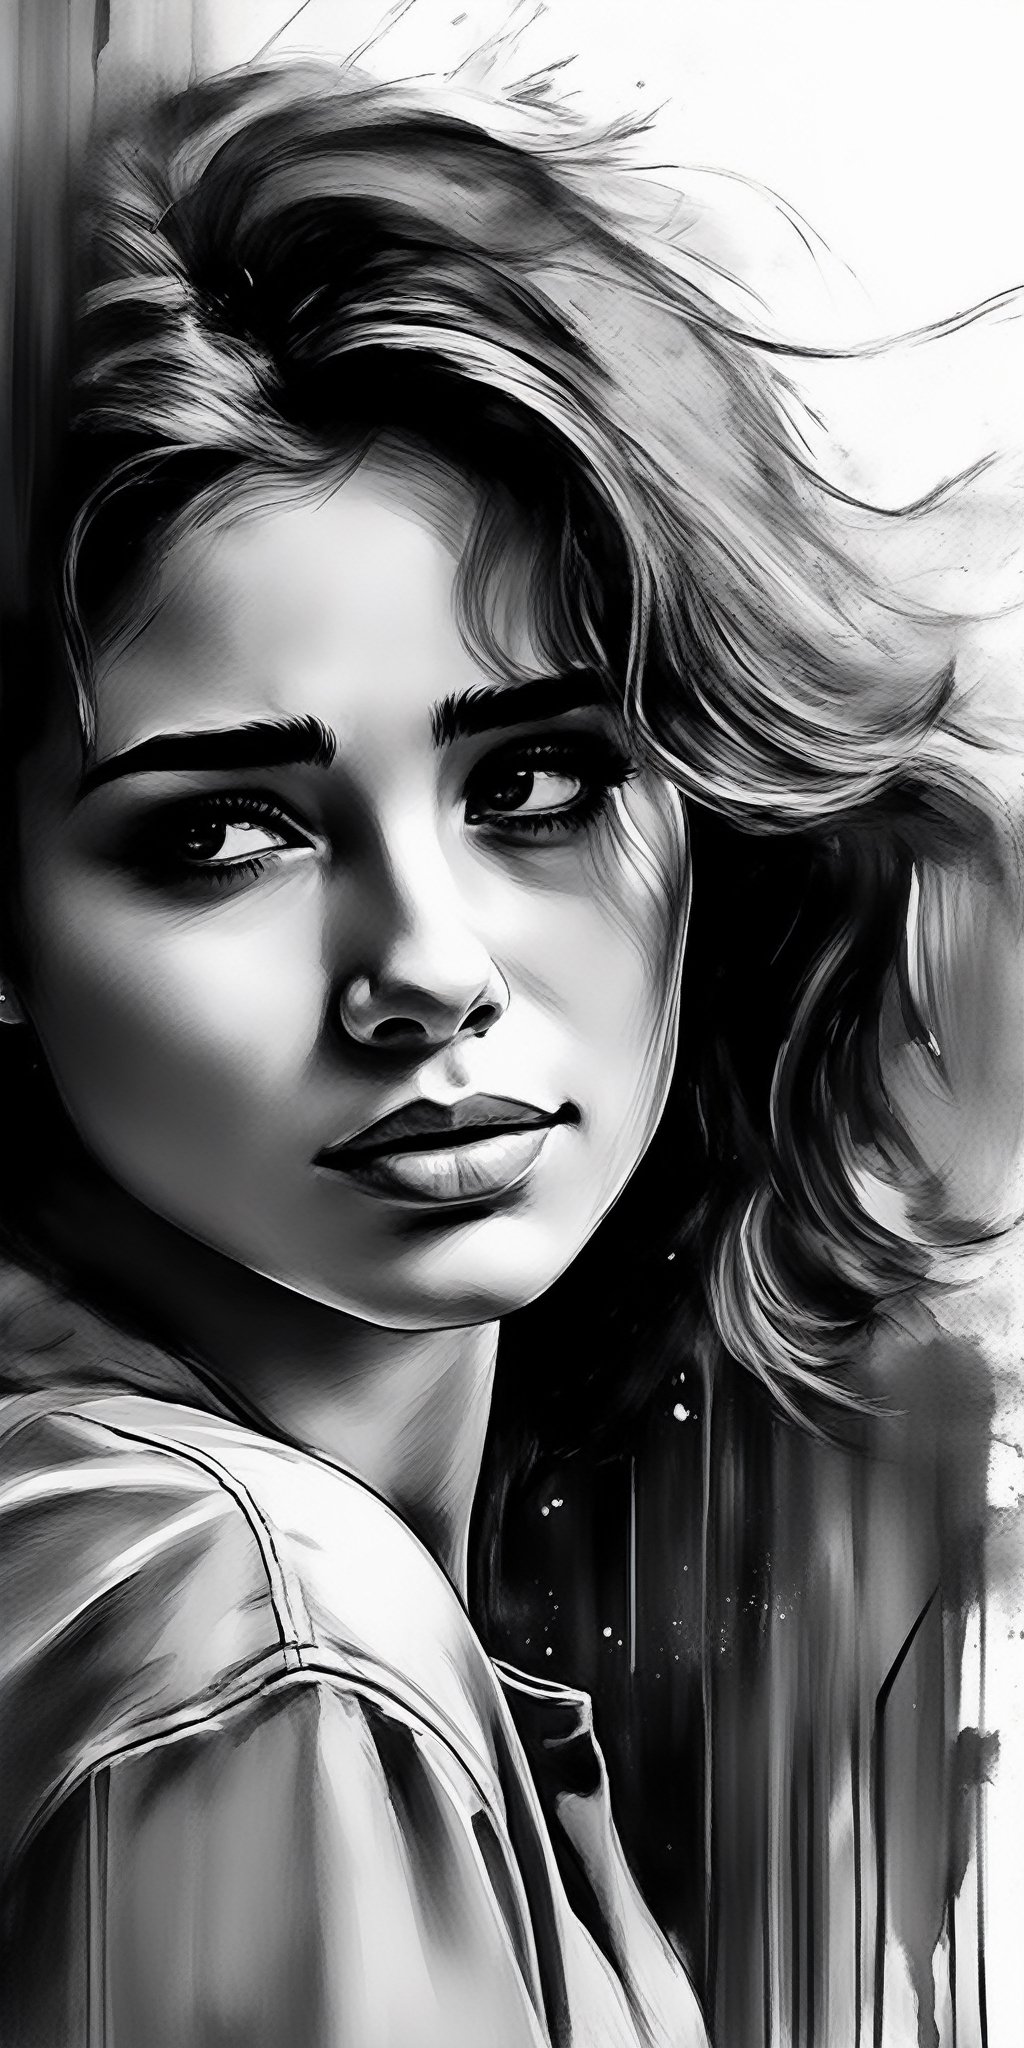 (masterpiece, high quality, 8K, high_res), 
ultra detailed illustration, ((ink drawning and pencil shading)),
image of beatiful young woman with sad slight smile and a makeup smeared from tears,
the picture tells the story of a breakup, when the heroine hears rumors about the happiness of her former love and she experiences conflicting feelings. On the one hand, she doesn’t want him to be happy, because she is no longer in his life, but on the other hand, she is glad that he found the strength to move on, while she still could not do this.
The image should be sensual, melancholy, beautiful and understandable. The simple execution should contain a story that touches the soul and evokes emotions. The motive of teenage love and infantilism is suitable, when sincere feelings lead to contradiction with oneself.fflixmj6,portraitart